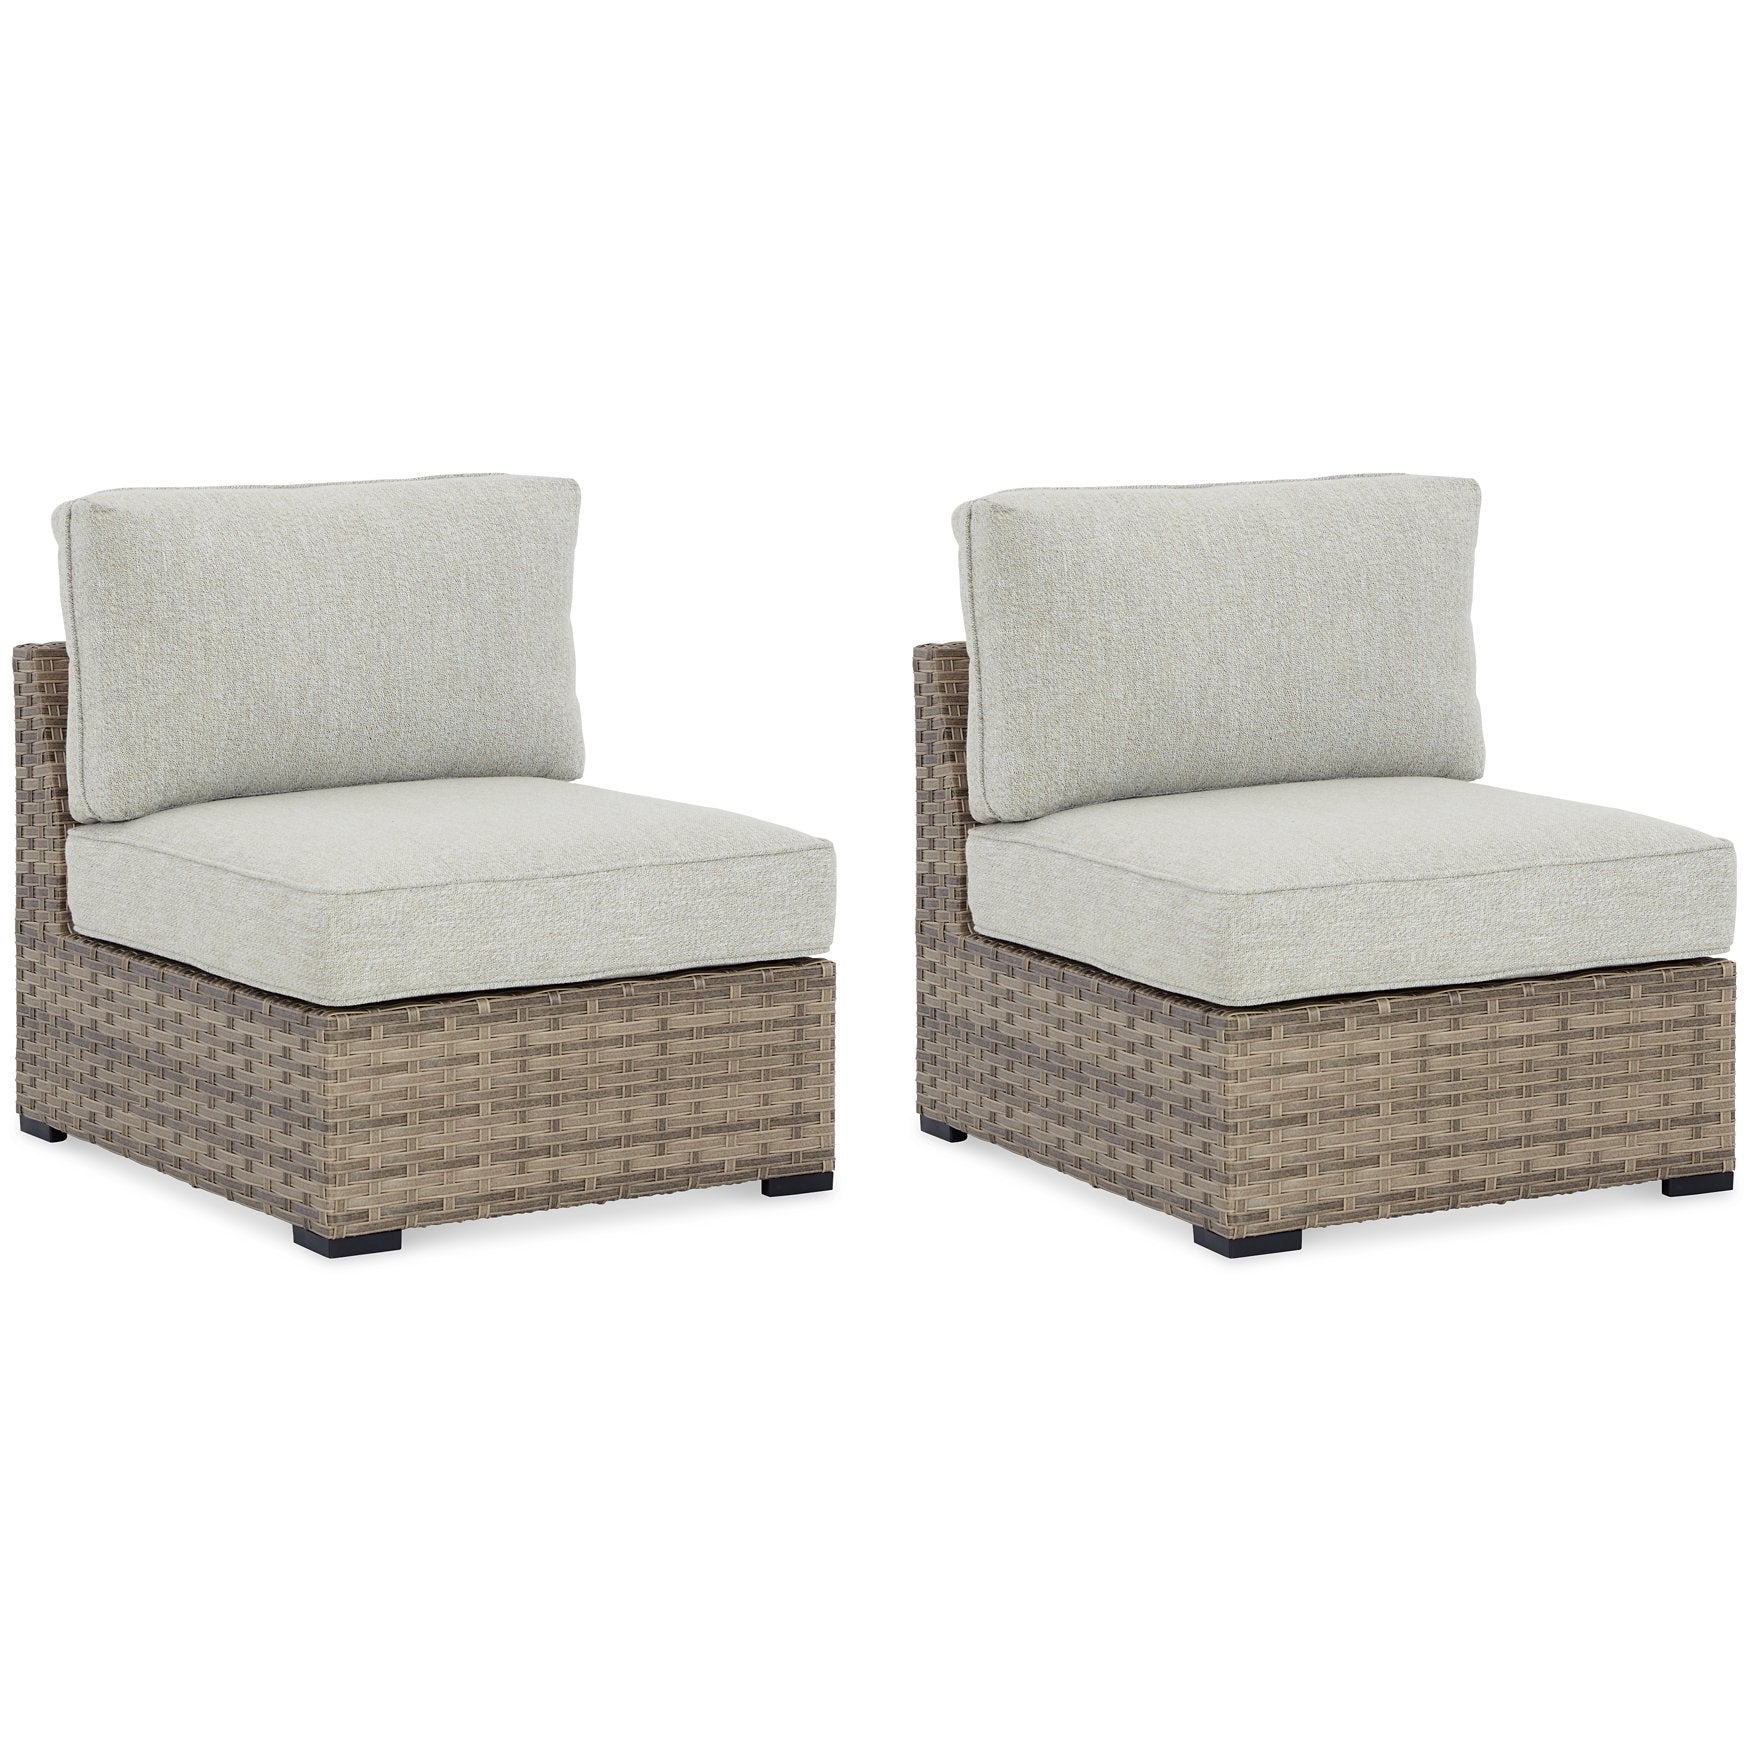 Calworth Outdoor Armless Chair with Cushion (Set of 2) - Half Price Furniture